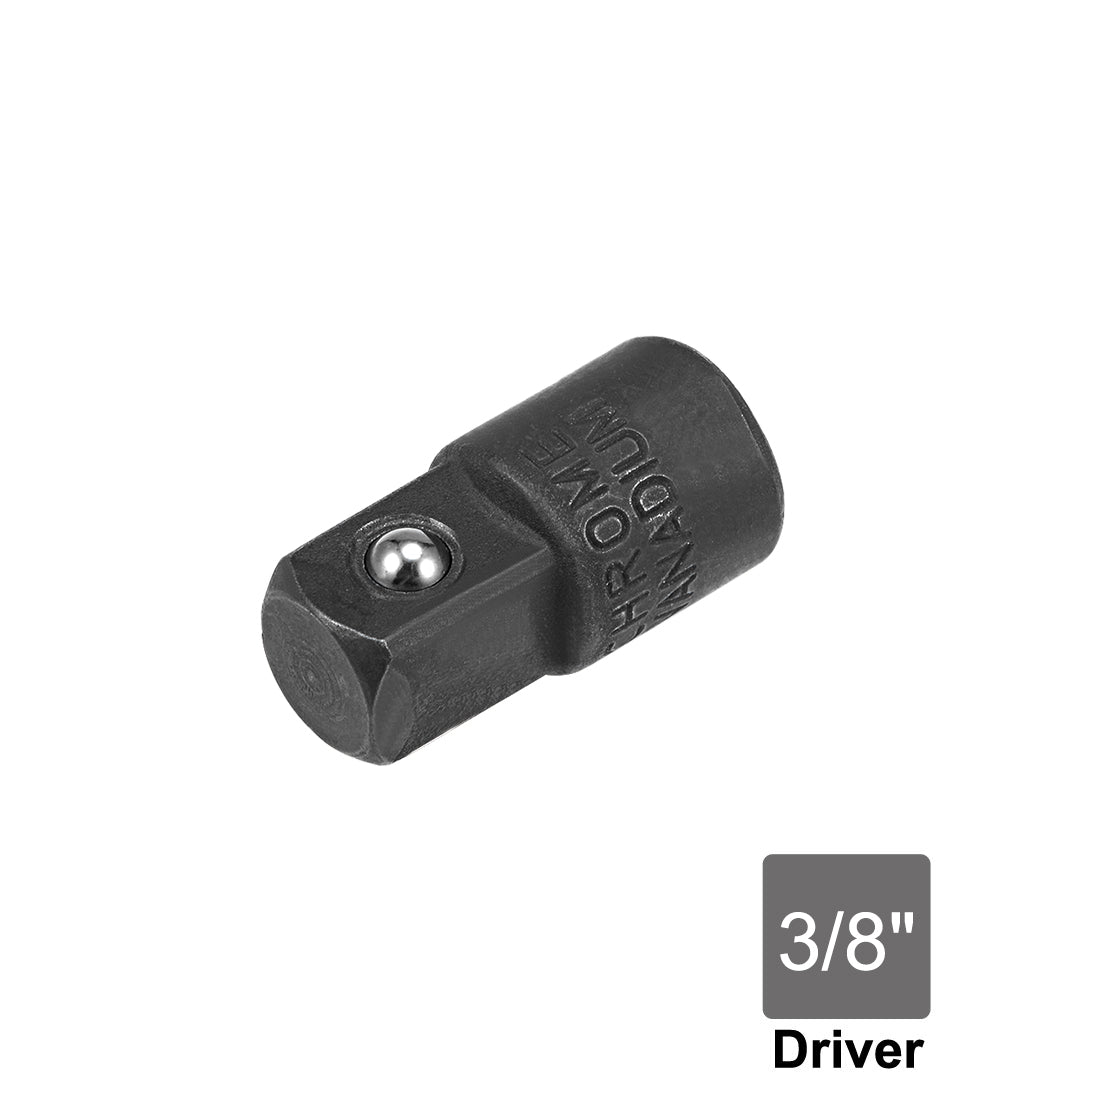 uxcell Uxcell 1/4 Inch Drive (F) x 3/8 Inch (M) Socket Adapter, Female to Male, Cr-V (Black)